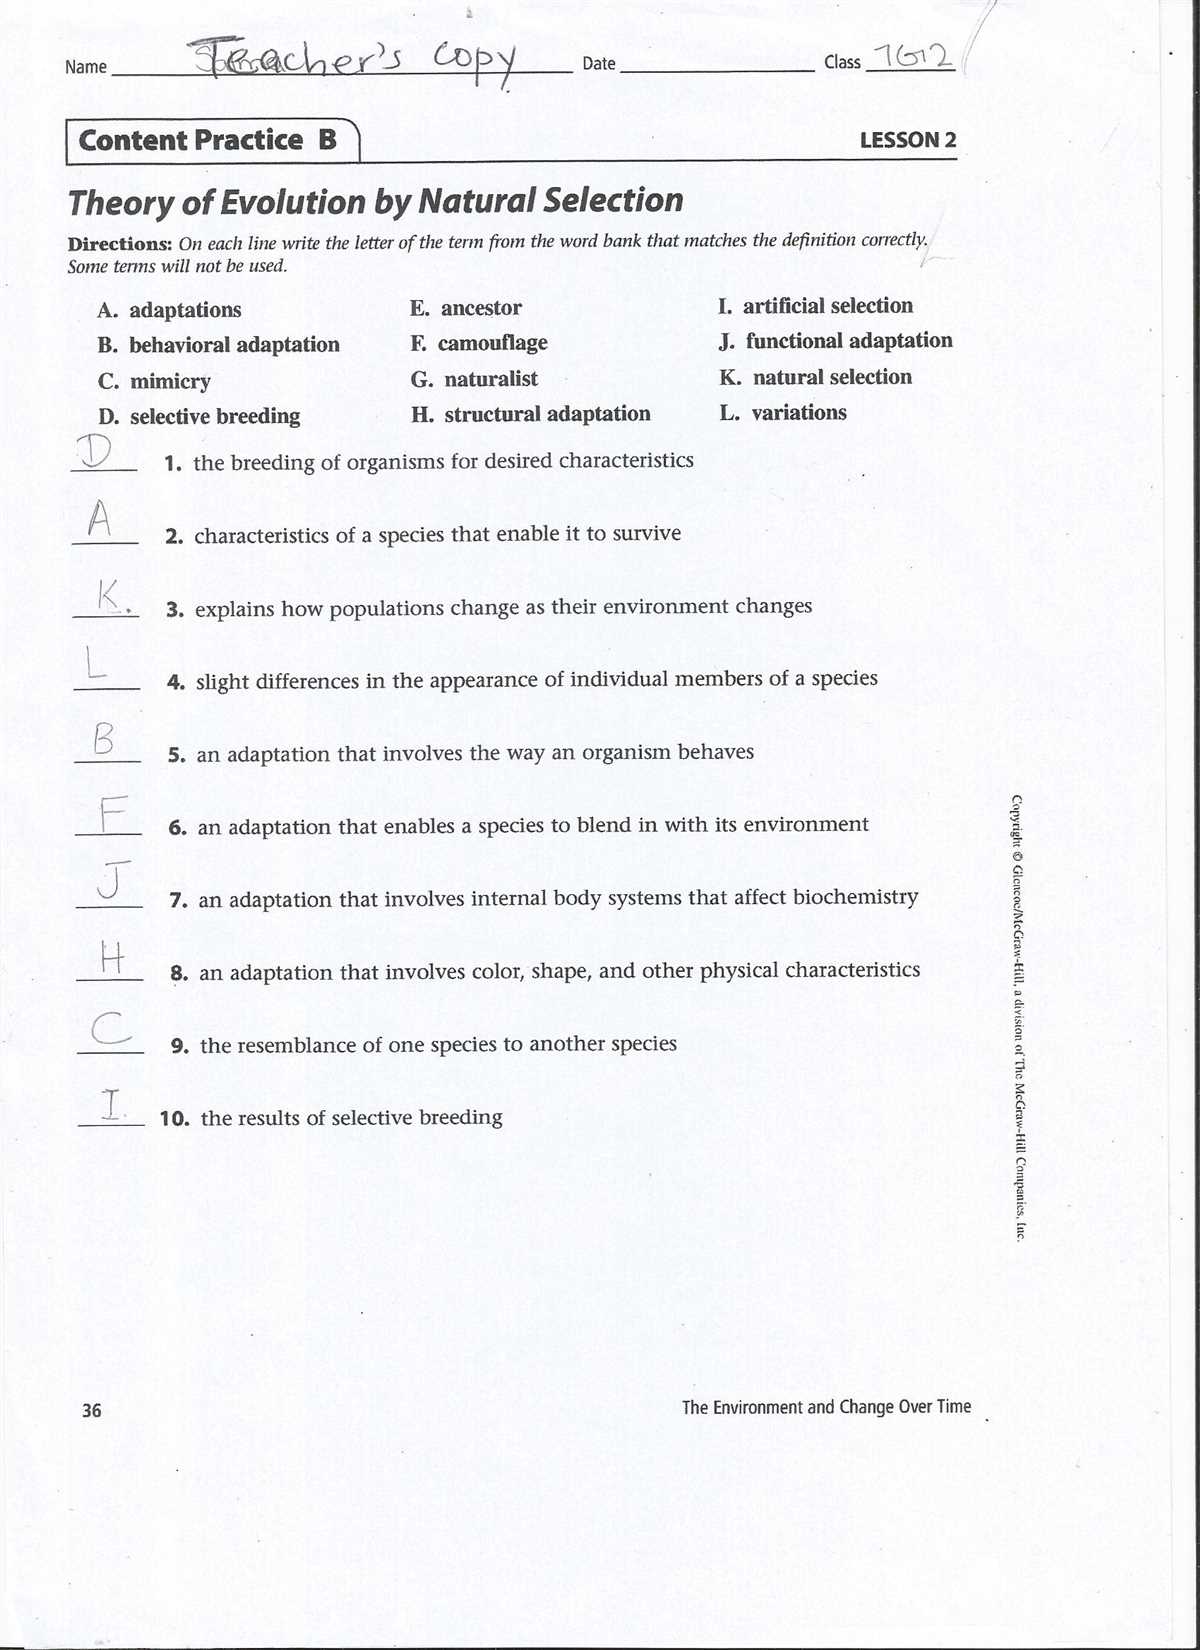 Answer Key for Multiple Choice Questions